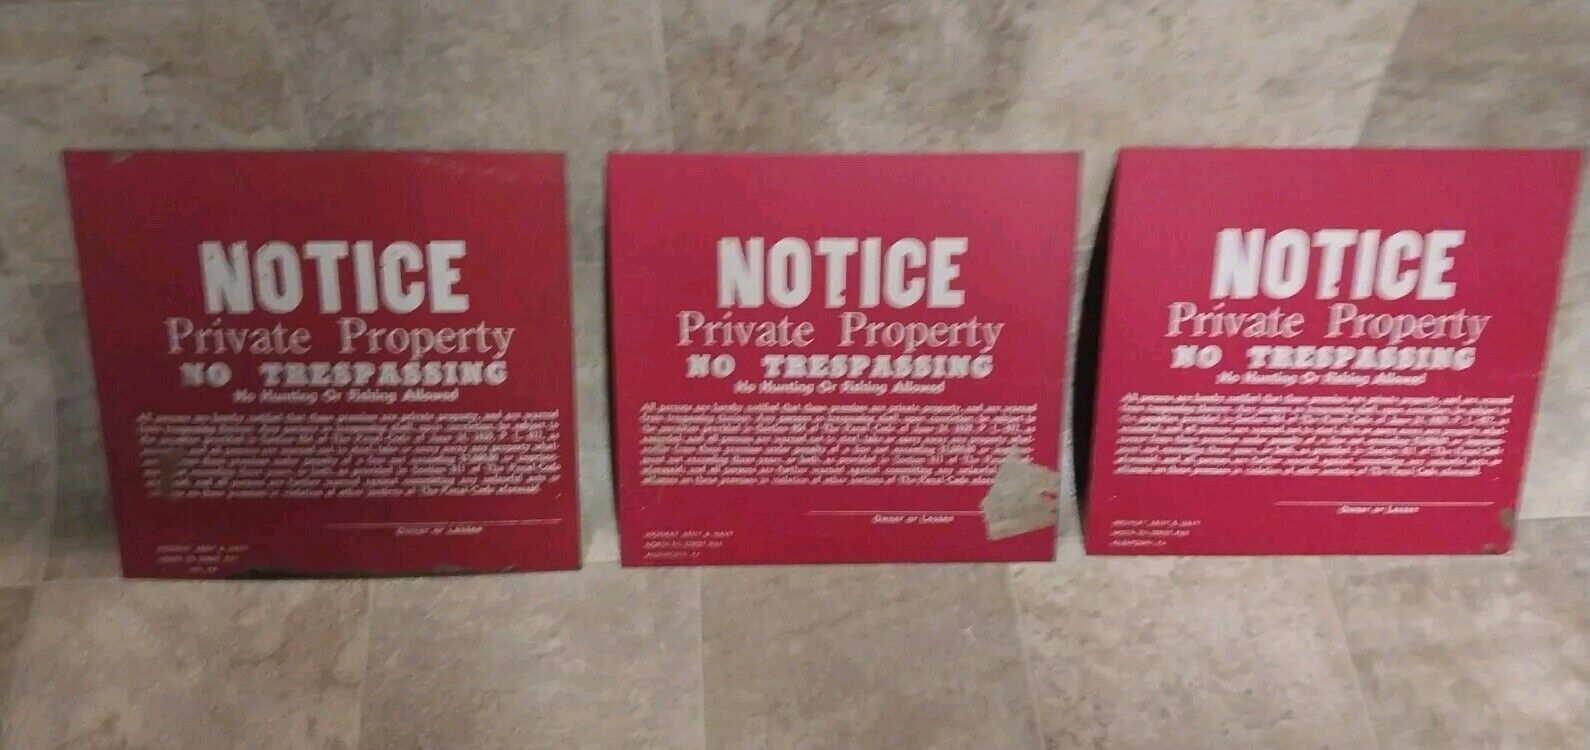 LOT OF 3 vintage Notice Private Property No Trespassing Metal Signs - Sign